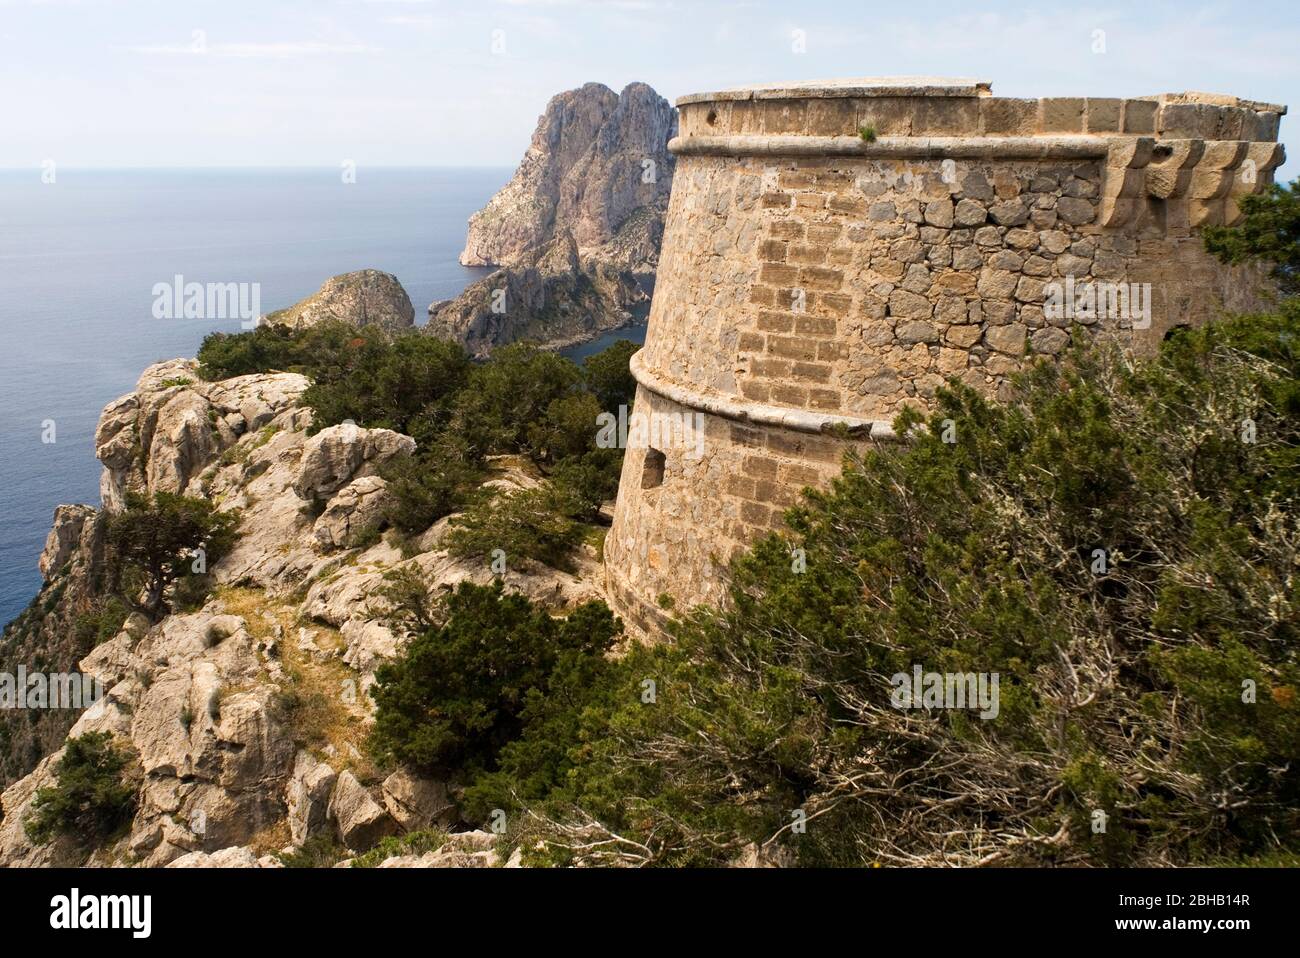 Panoramic view from the Torre des Savinar, Ibiza, Spain Stock Photo